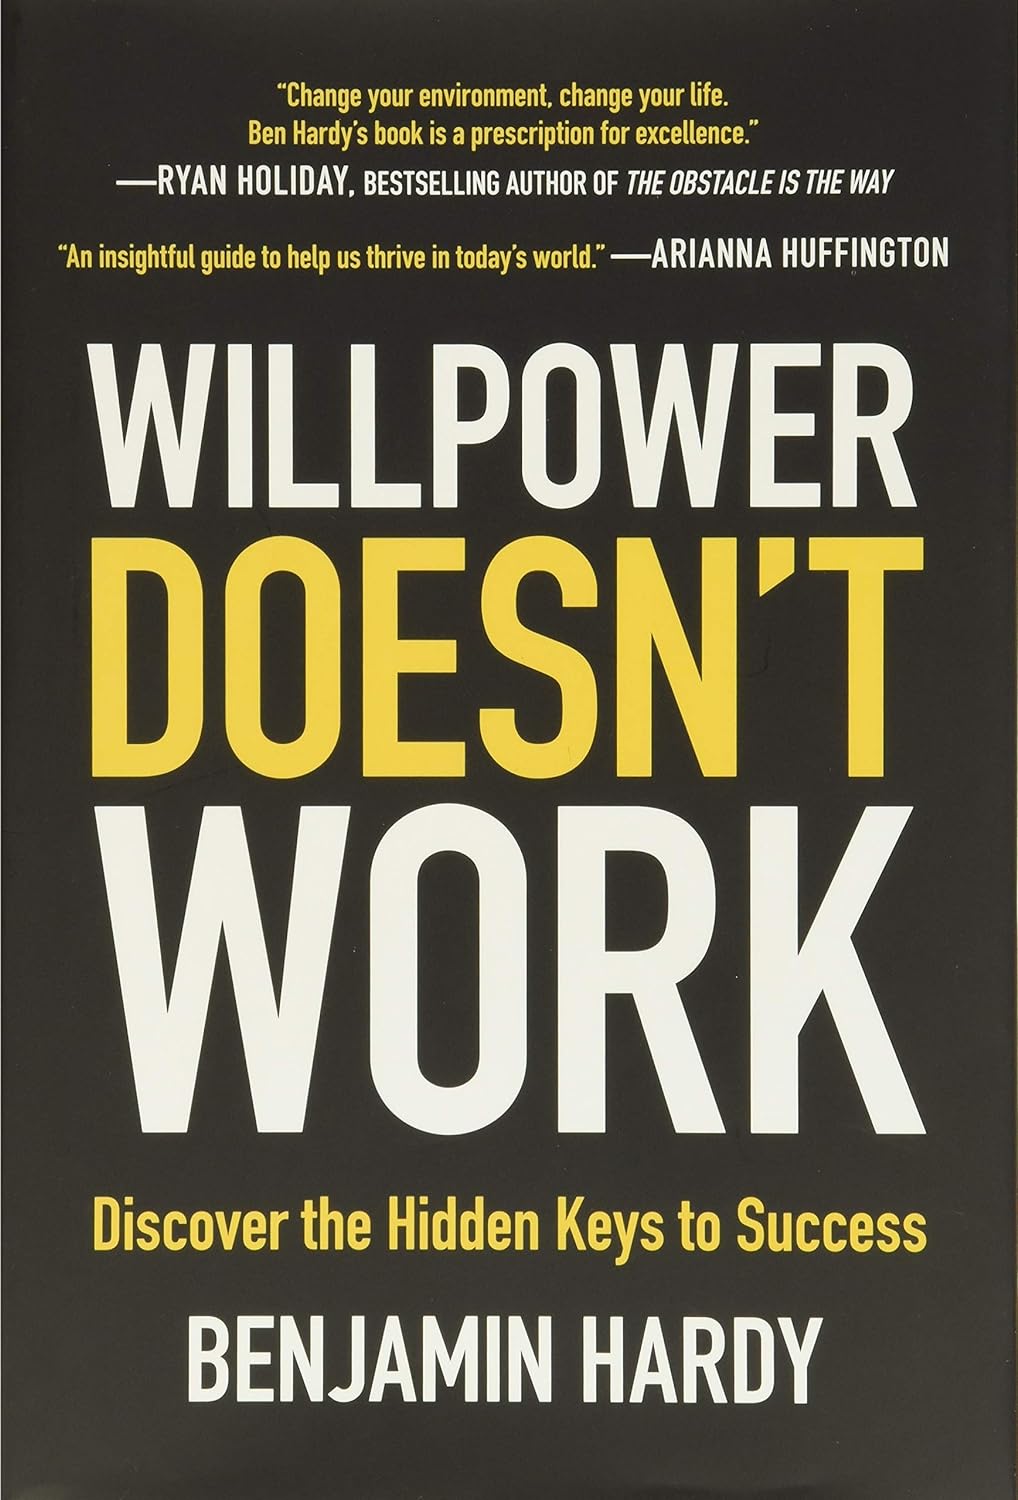 Book cover - Willpower Doesn't Work